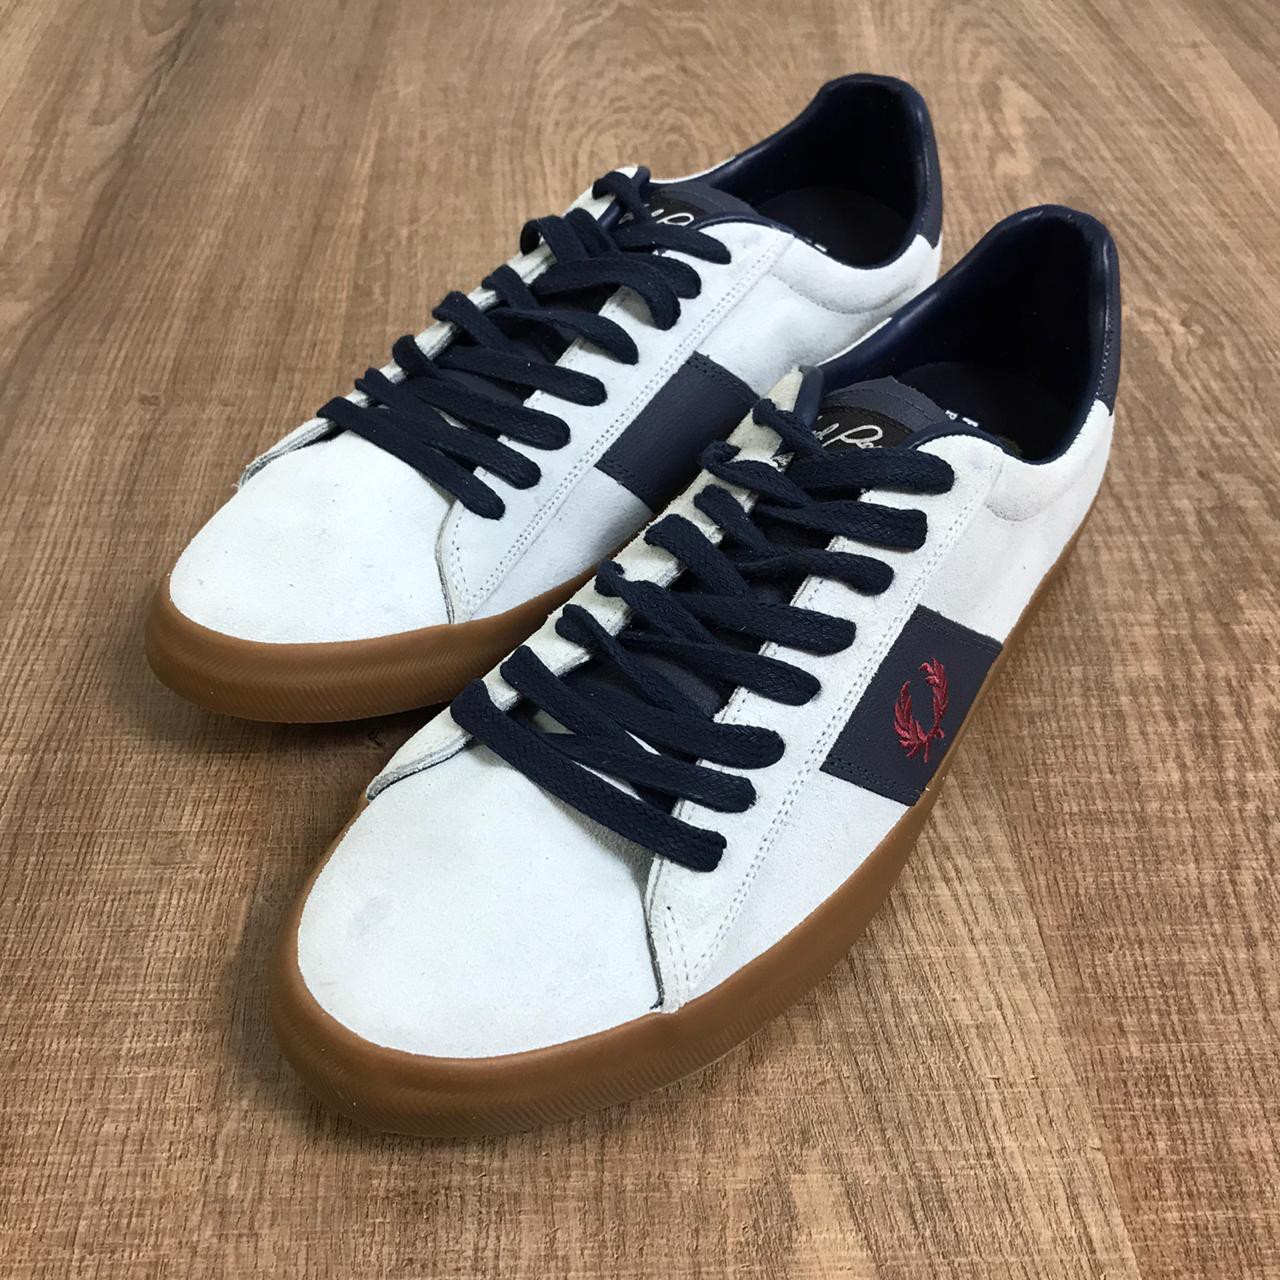 sapatenis fred perry branco